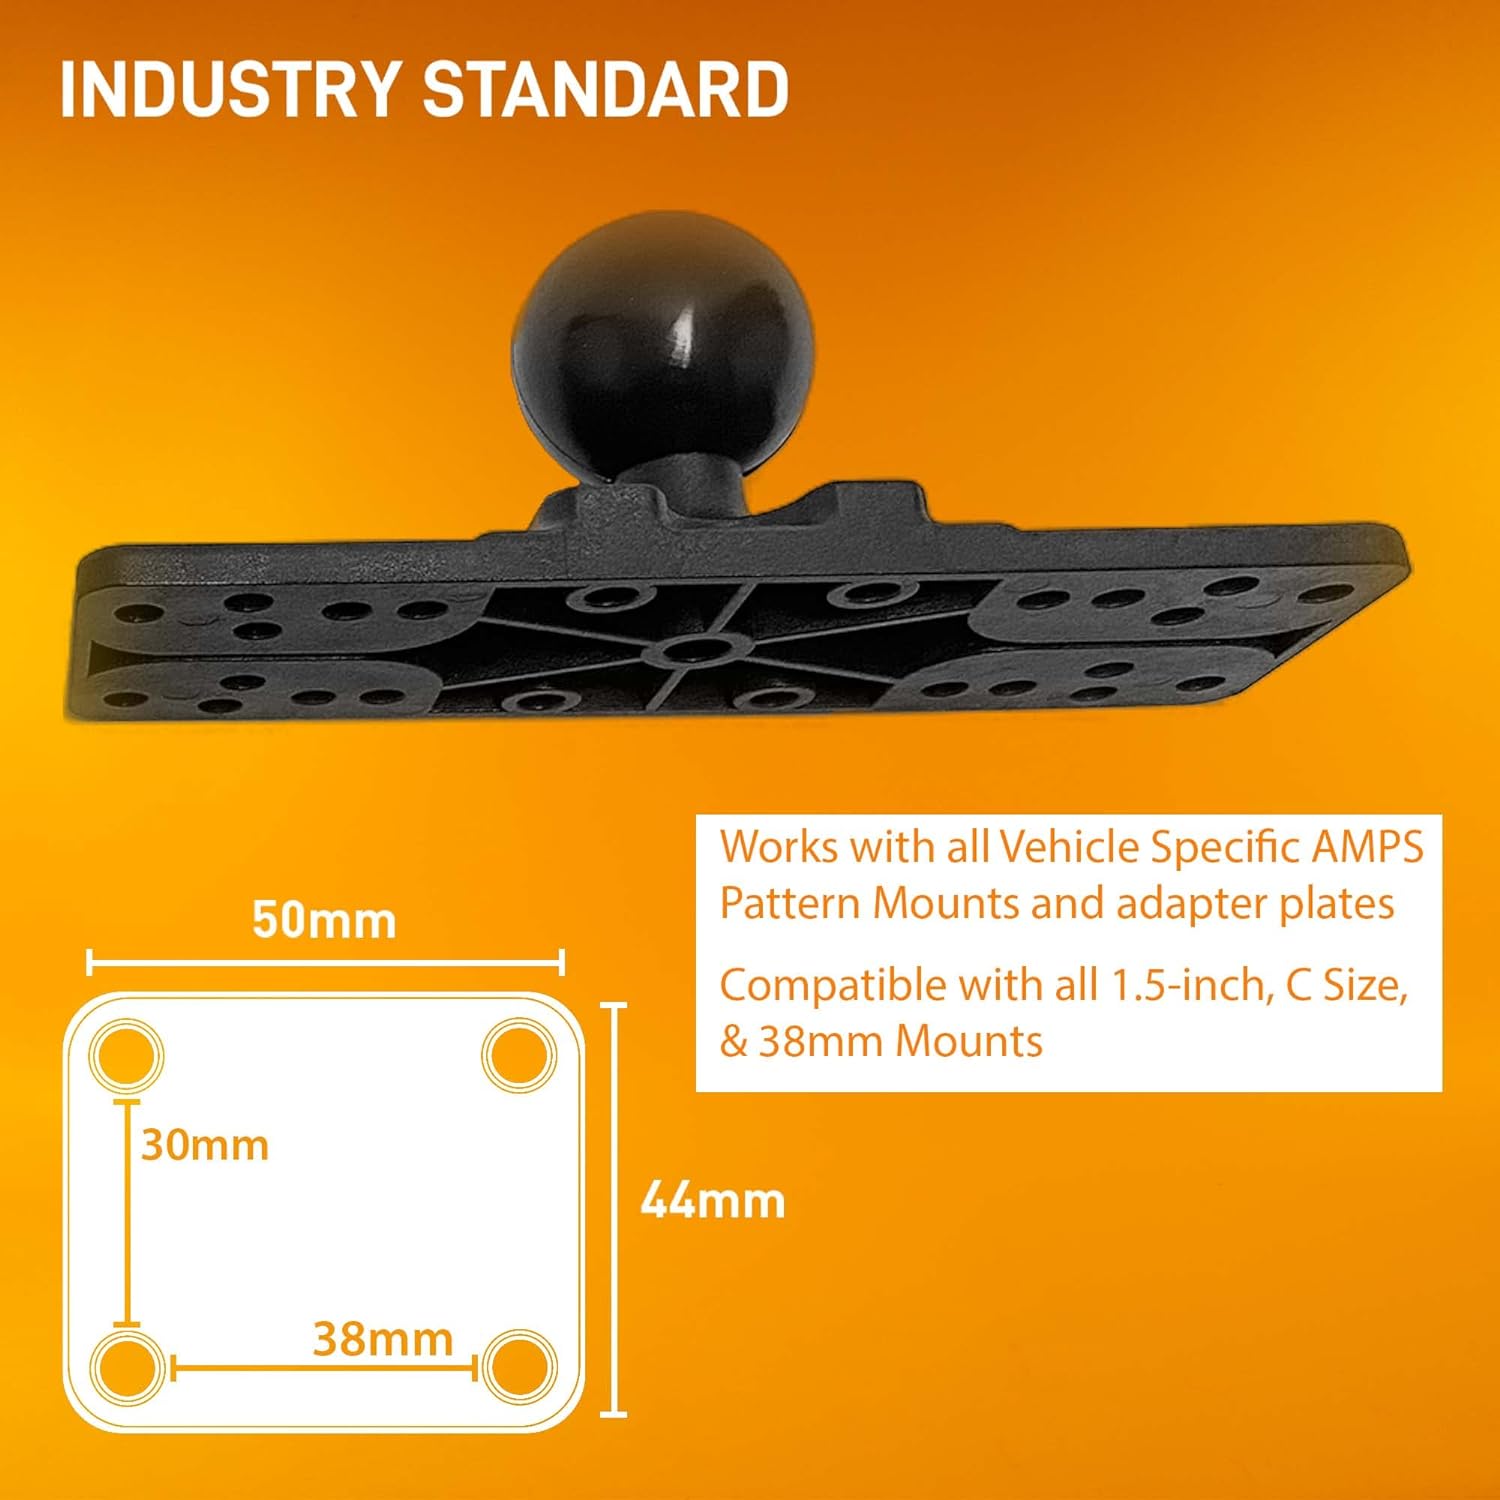 iBOLT 38mm / 1.5 inch Ball Composite Universal Marine Electronic Fish Finder Mounting Plate for Industry Standard Dual Ball Socket mounting arms